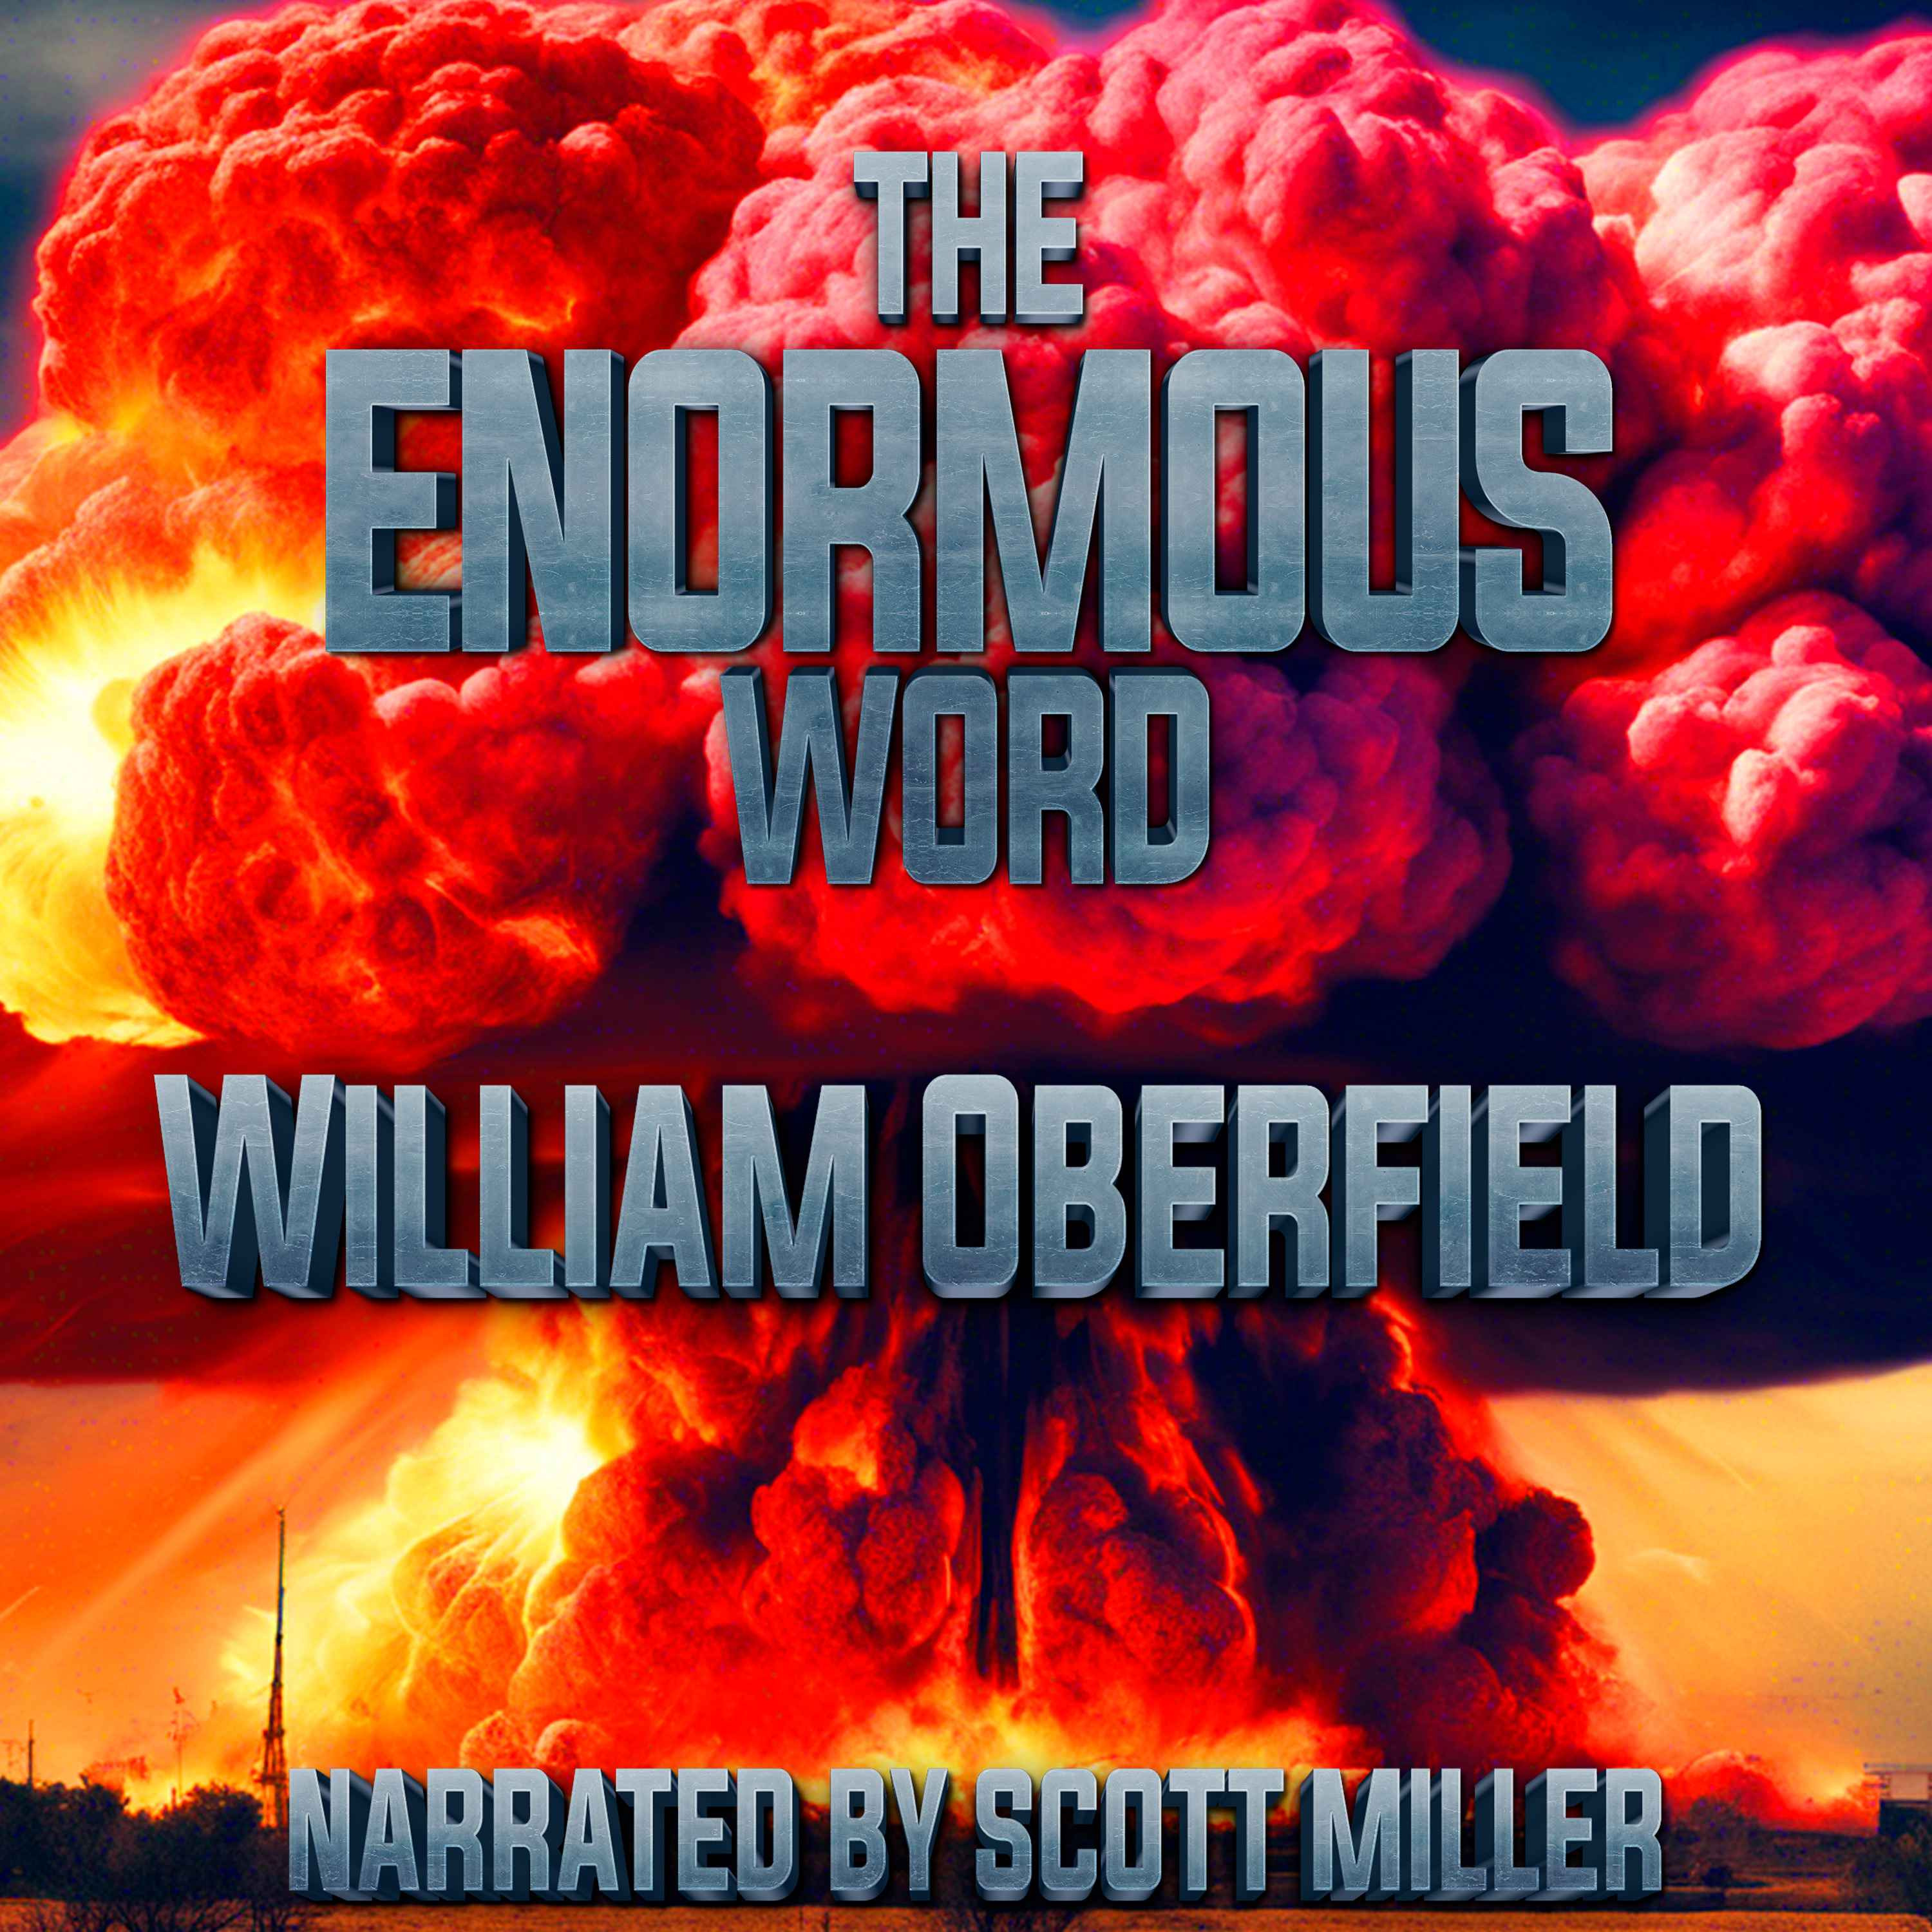 The Enormous Word by William Oberfield - An Apocalyptic Sci-Fi Adventure